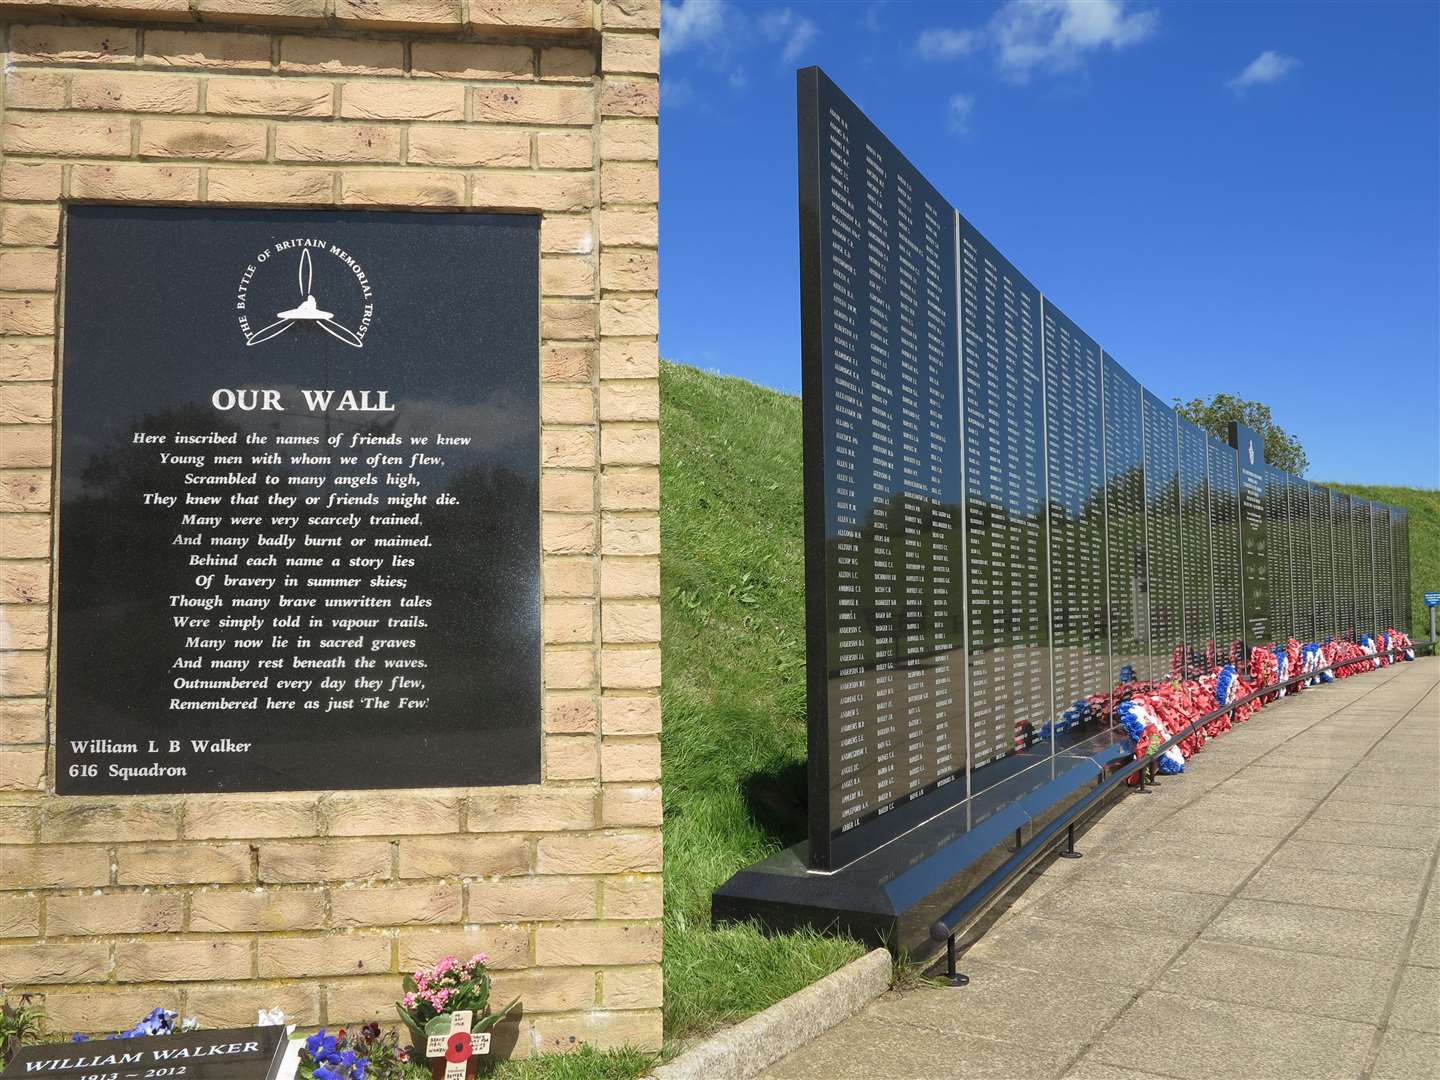 The memorial is a monument to aircrew who flew in the Battle of Britain